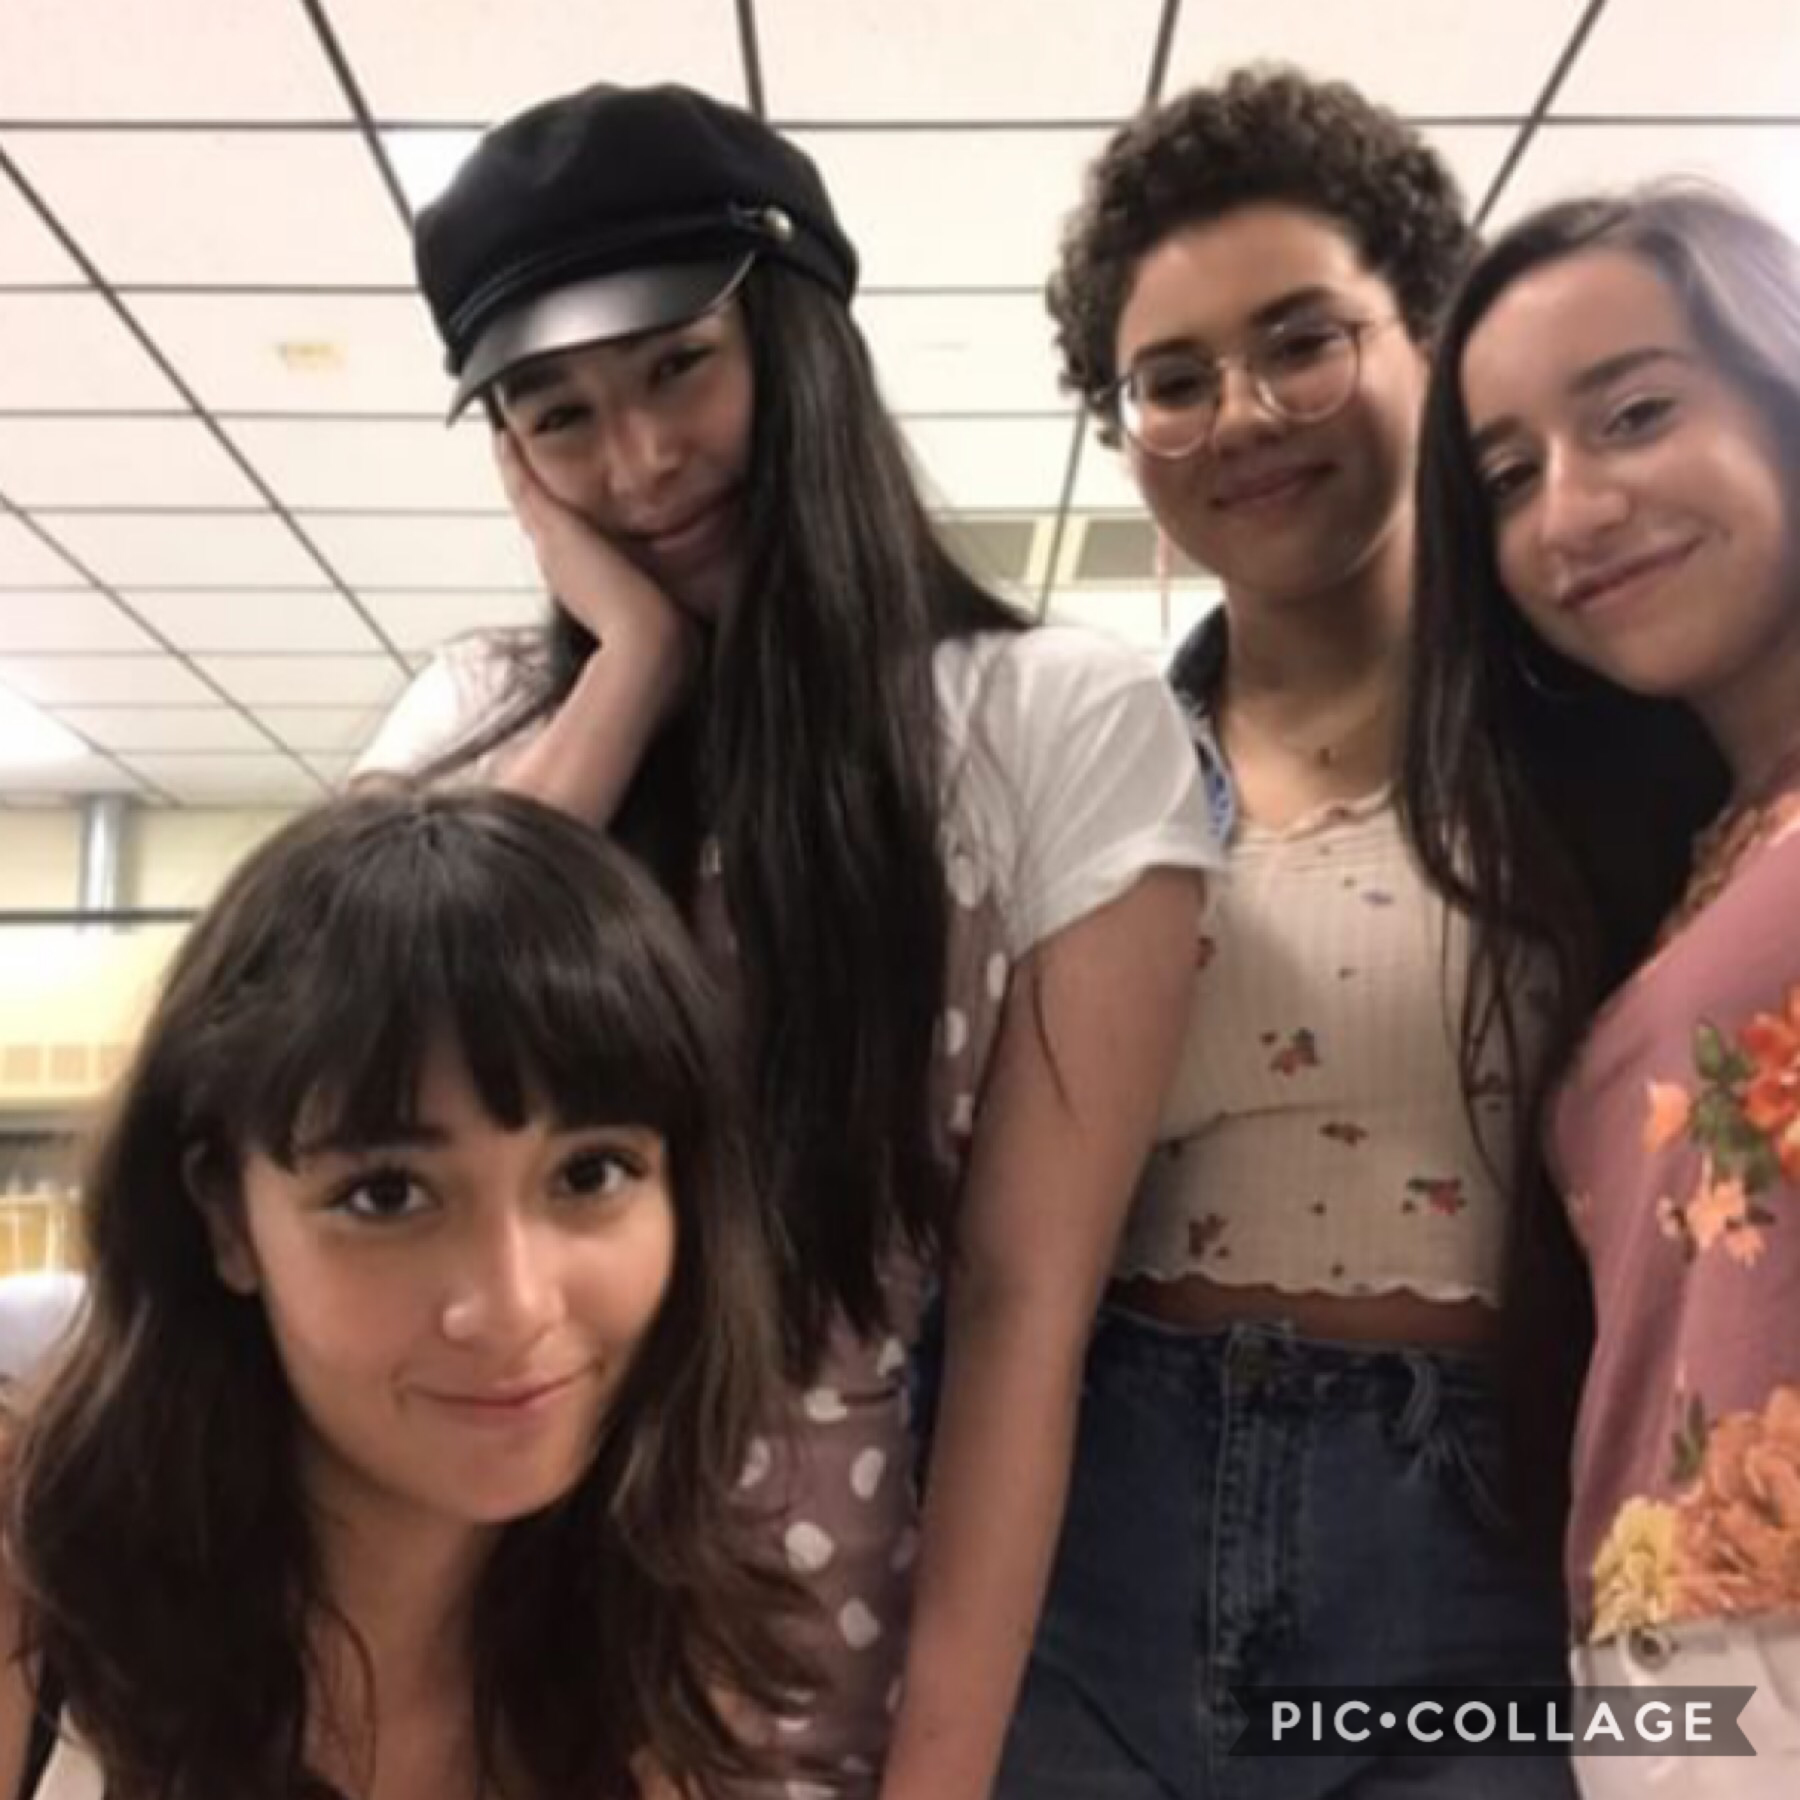 LOOK AT MY BIOLOGY FRIENDS 🥰. Left to right, Ellie (dont her super well but shes nice and shes friends w sara) , sara (the model) THE MOST PRETTY PERSON IV EVER SEEN, me, and estella my true homie🤙🏽